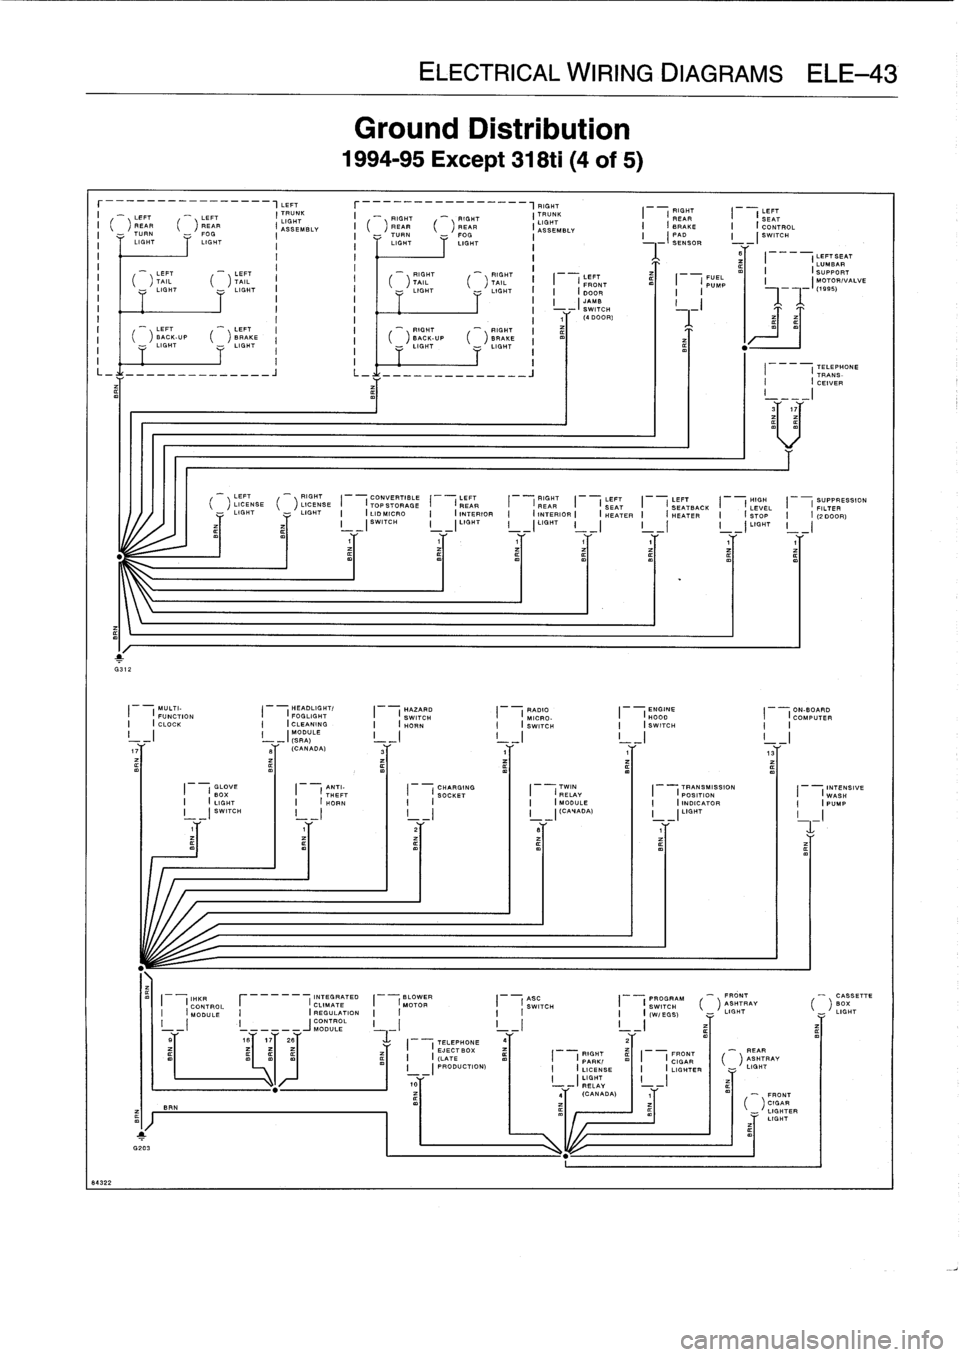 BMW M3 1993 E36 Owners Guide 
ELECTRICAL
WIRING
DIAGRAMSELE-43

r----------_-__--,LEFT

	

r---__-------~_--,FIGHT
I

	

-

	

RIGHT

	

LIT
LEFT

	

"-

	

LEFT

	

I
IGHT
K

	

I

	

_

	

RIGHT

	



	

RIGHT

	

I
TRUNK
SEM